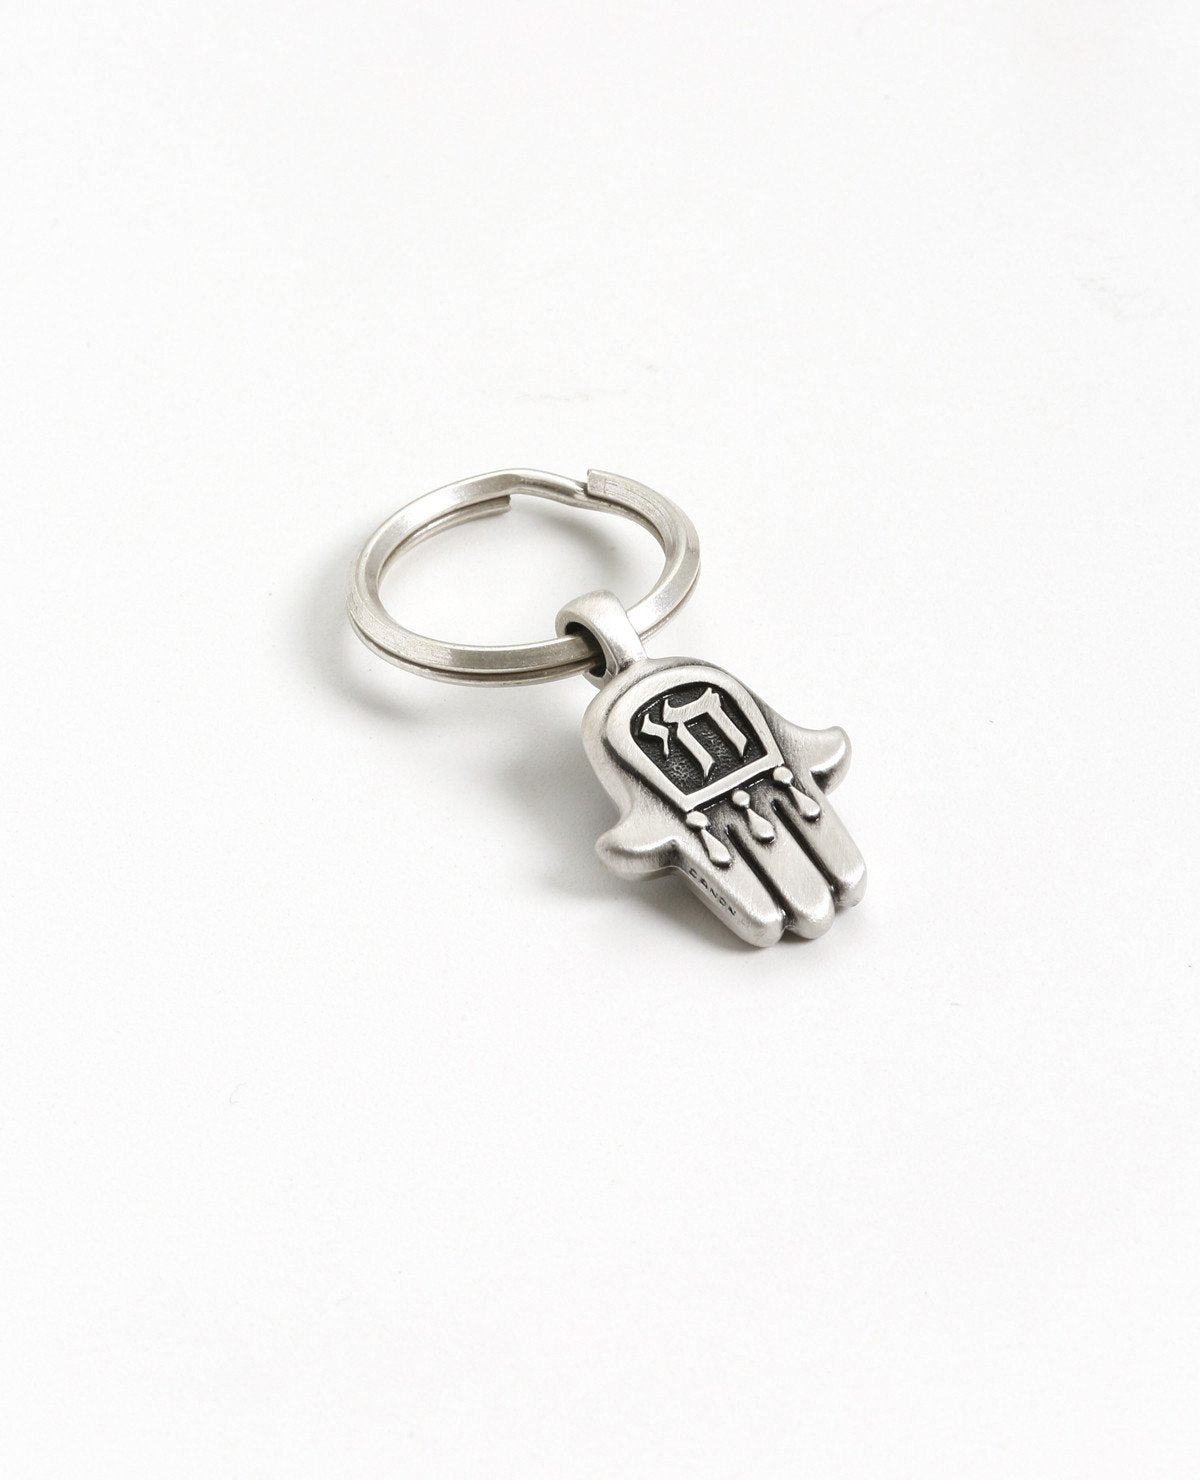 A small Hamsa shaped Chai keychain that carries a blessing with it. 
On one side of the keychain is a Hamsa decorated with a round blue colored stone, and on the other side the blessed "Chai" letters are engraved, symbolizing protection.
Makes a joyful gift for any occasion and for anyone who we may want the keys to their life be kept on a blessed and beautiful keychain like this one.  Length: 4 cm  Width: 2 cm